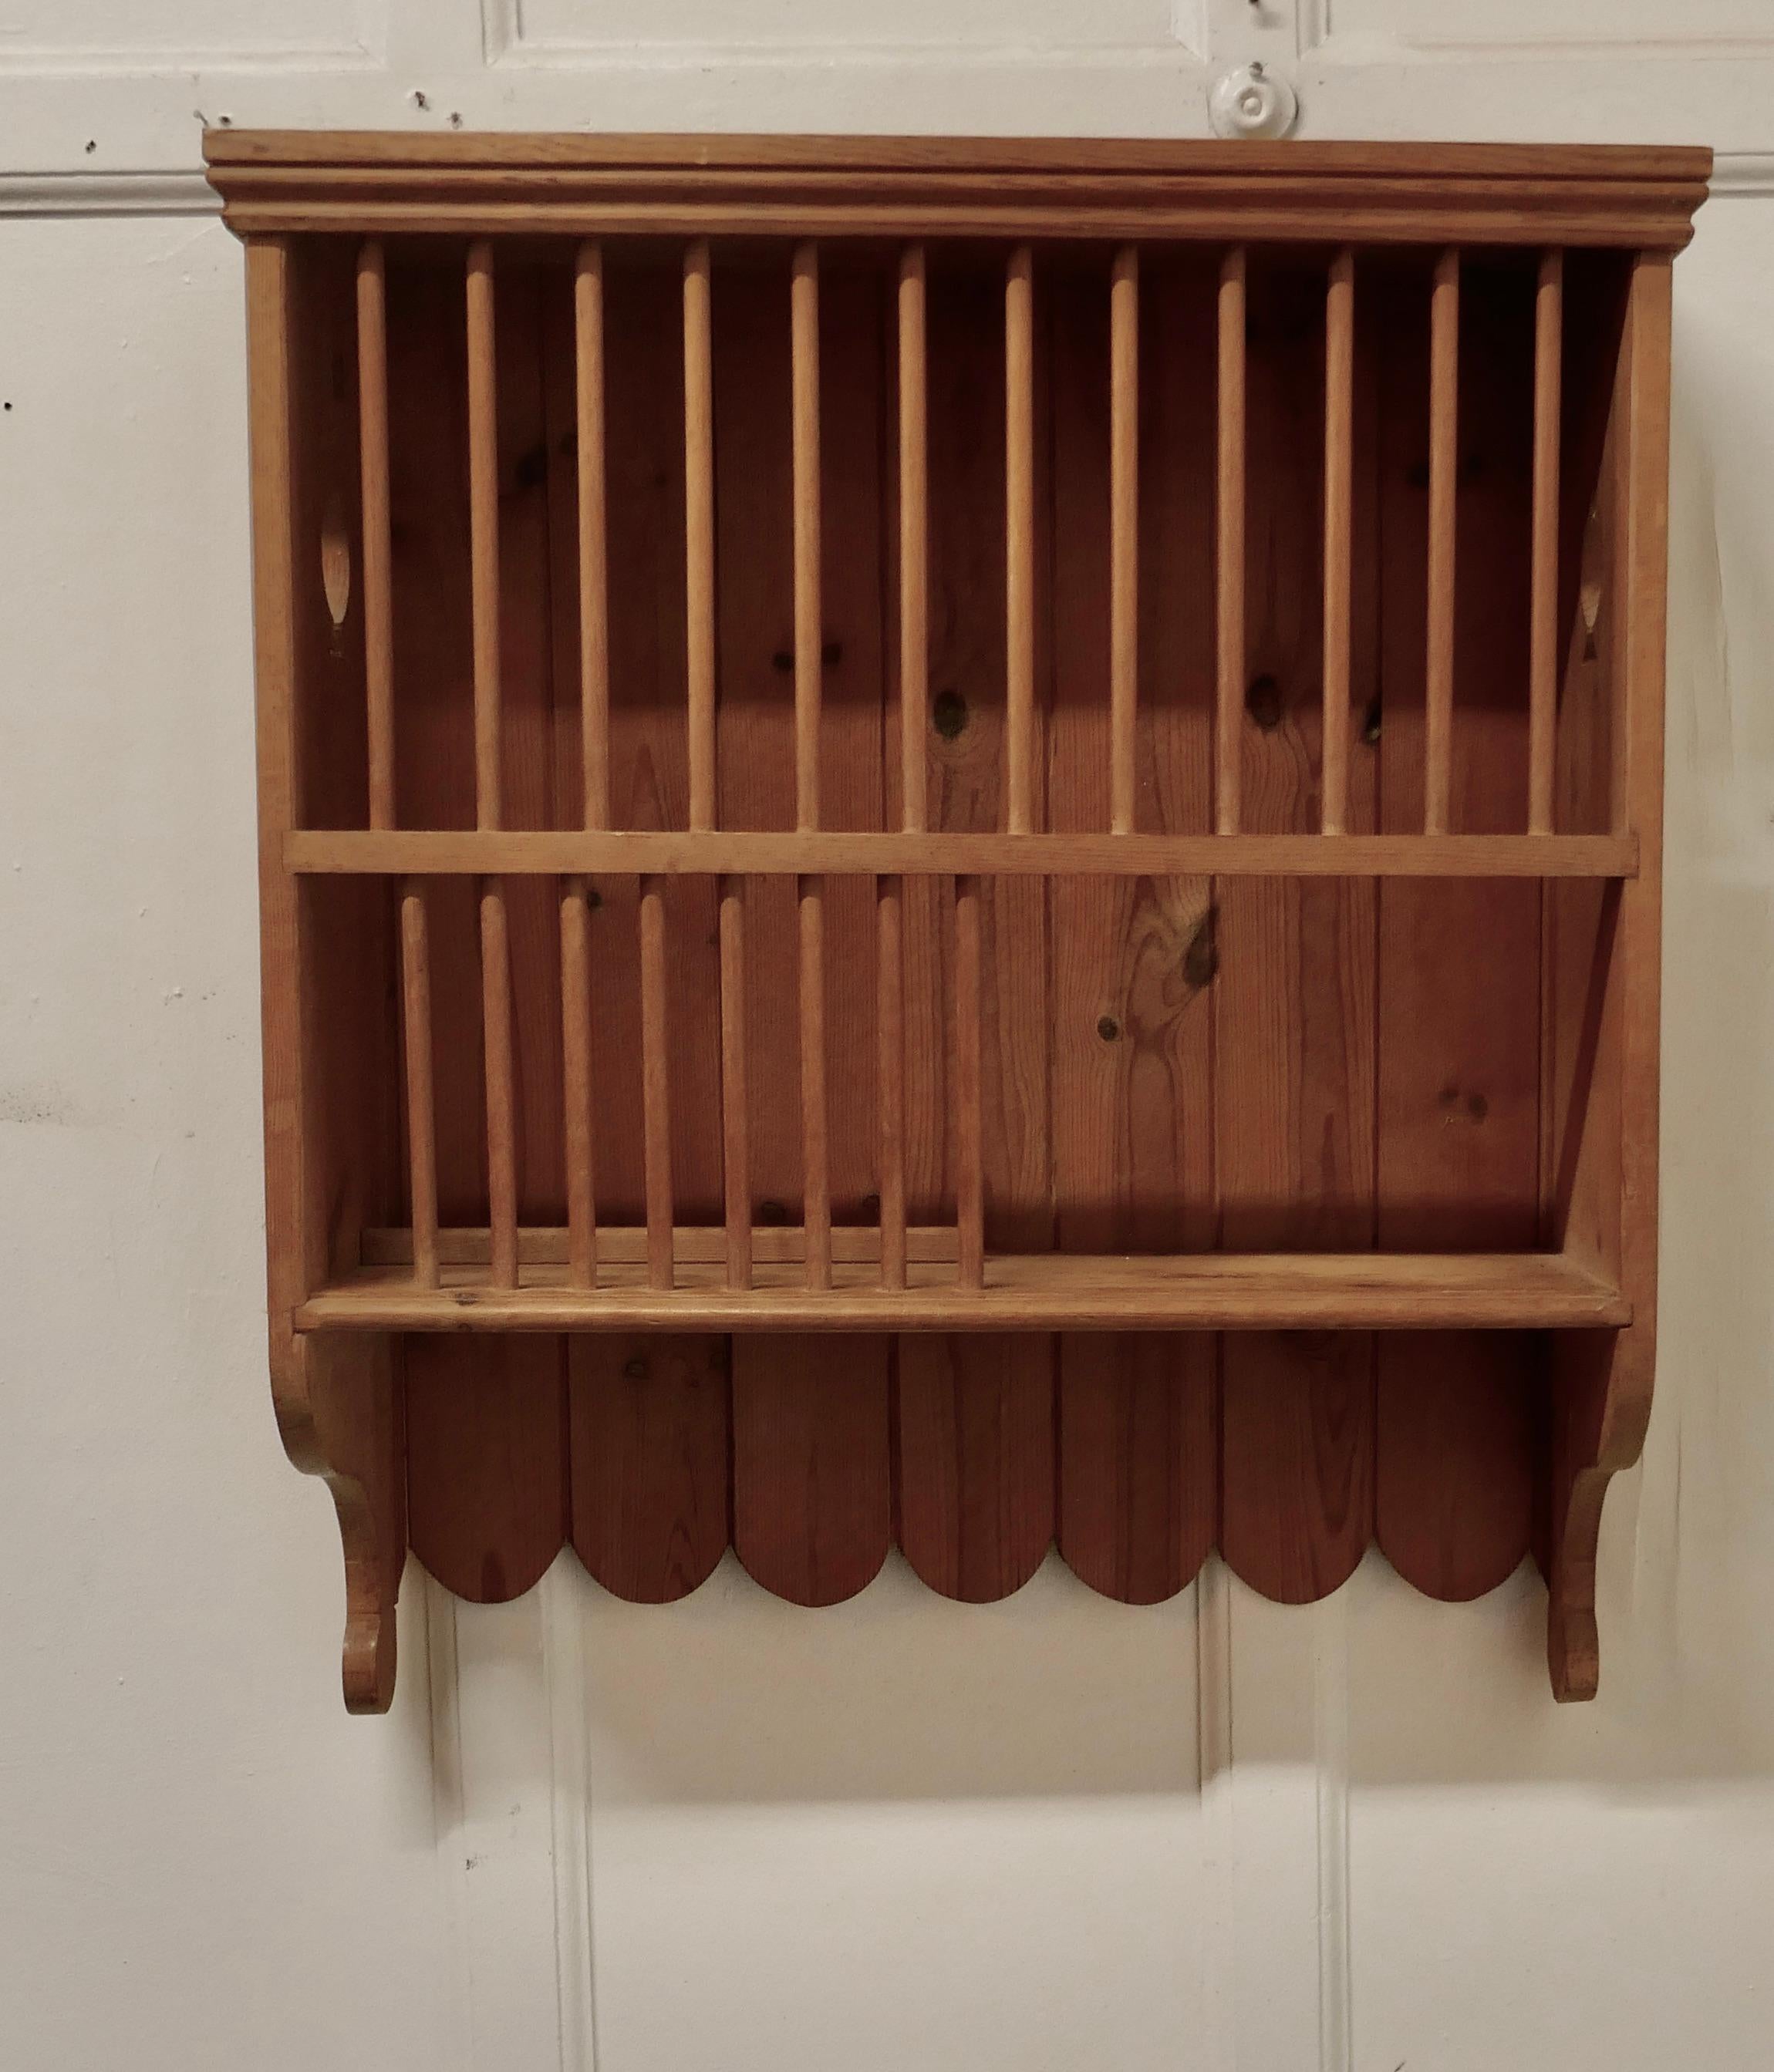 Wall hanging pine plate rack


This useful piece hangs on the wall and drains and stores plates until required, this one has a planked back and decorative holes on the sides.
It has a pine frame and wooden dowels with a waterfall shape, allowing